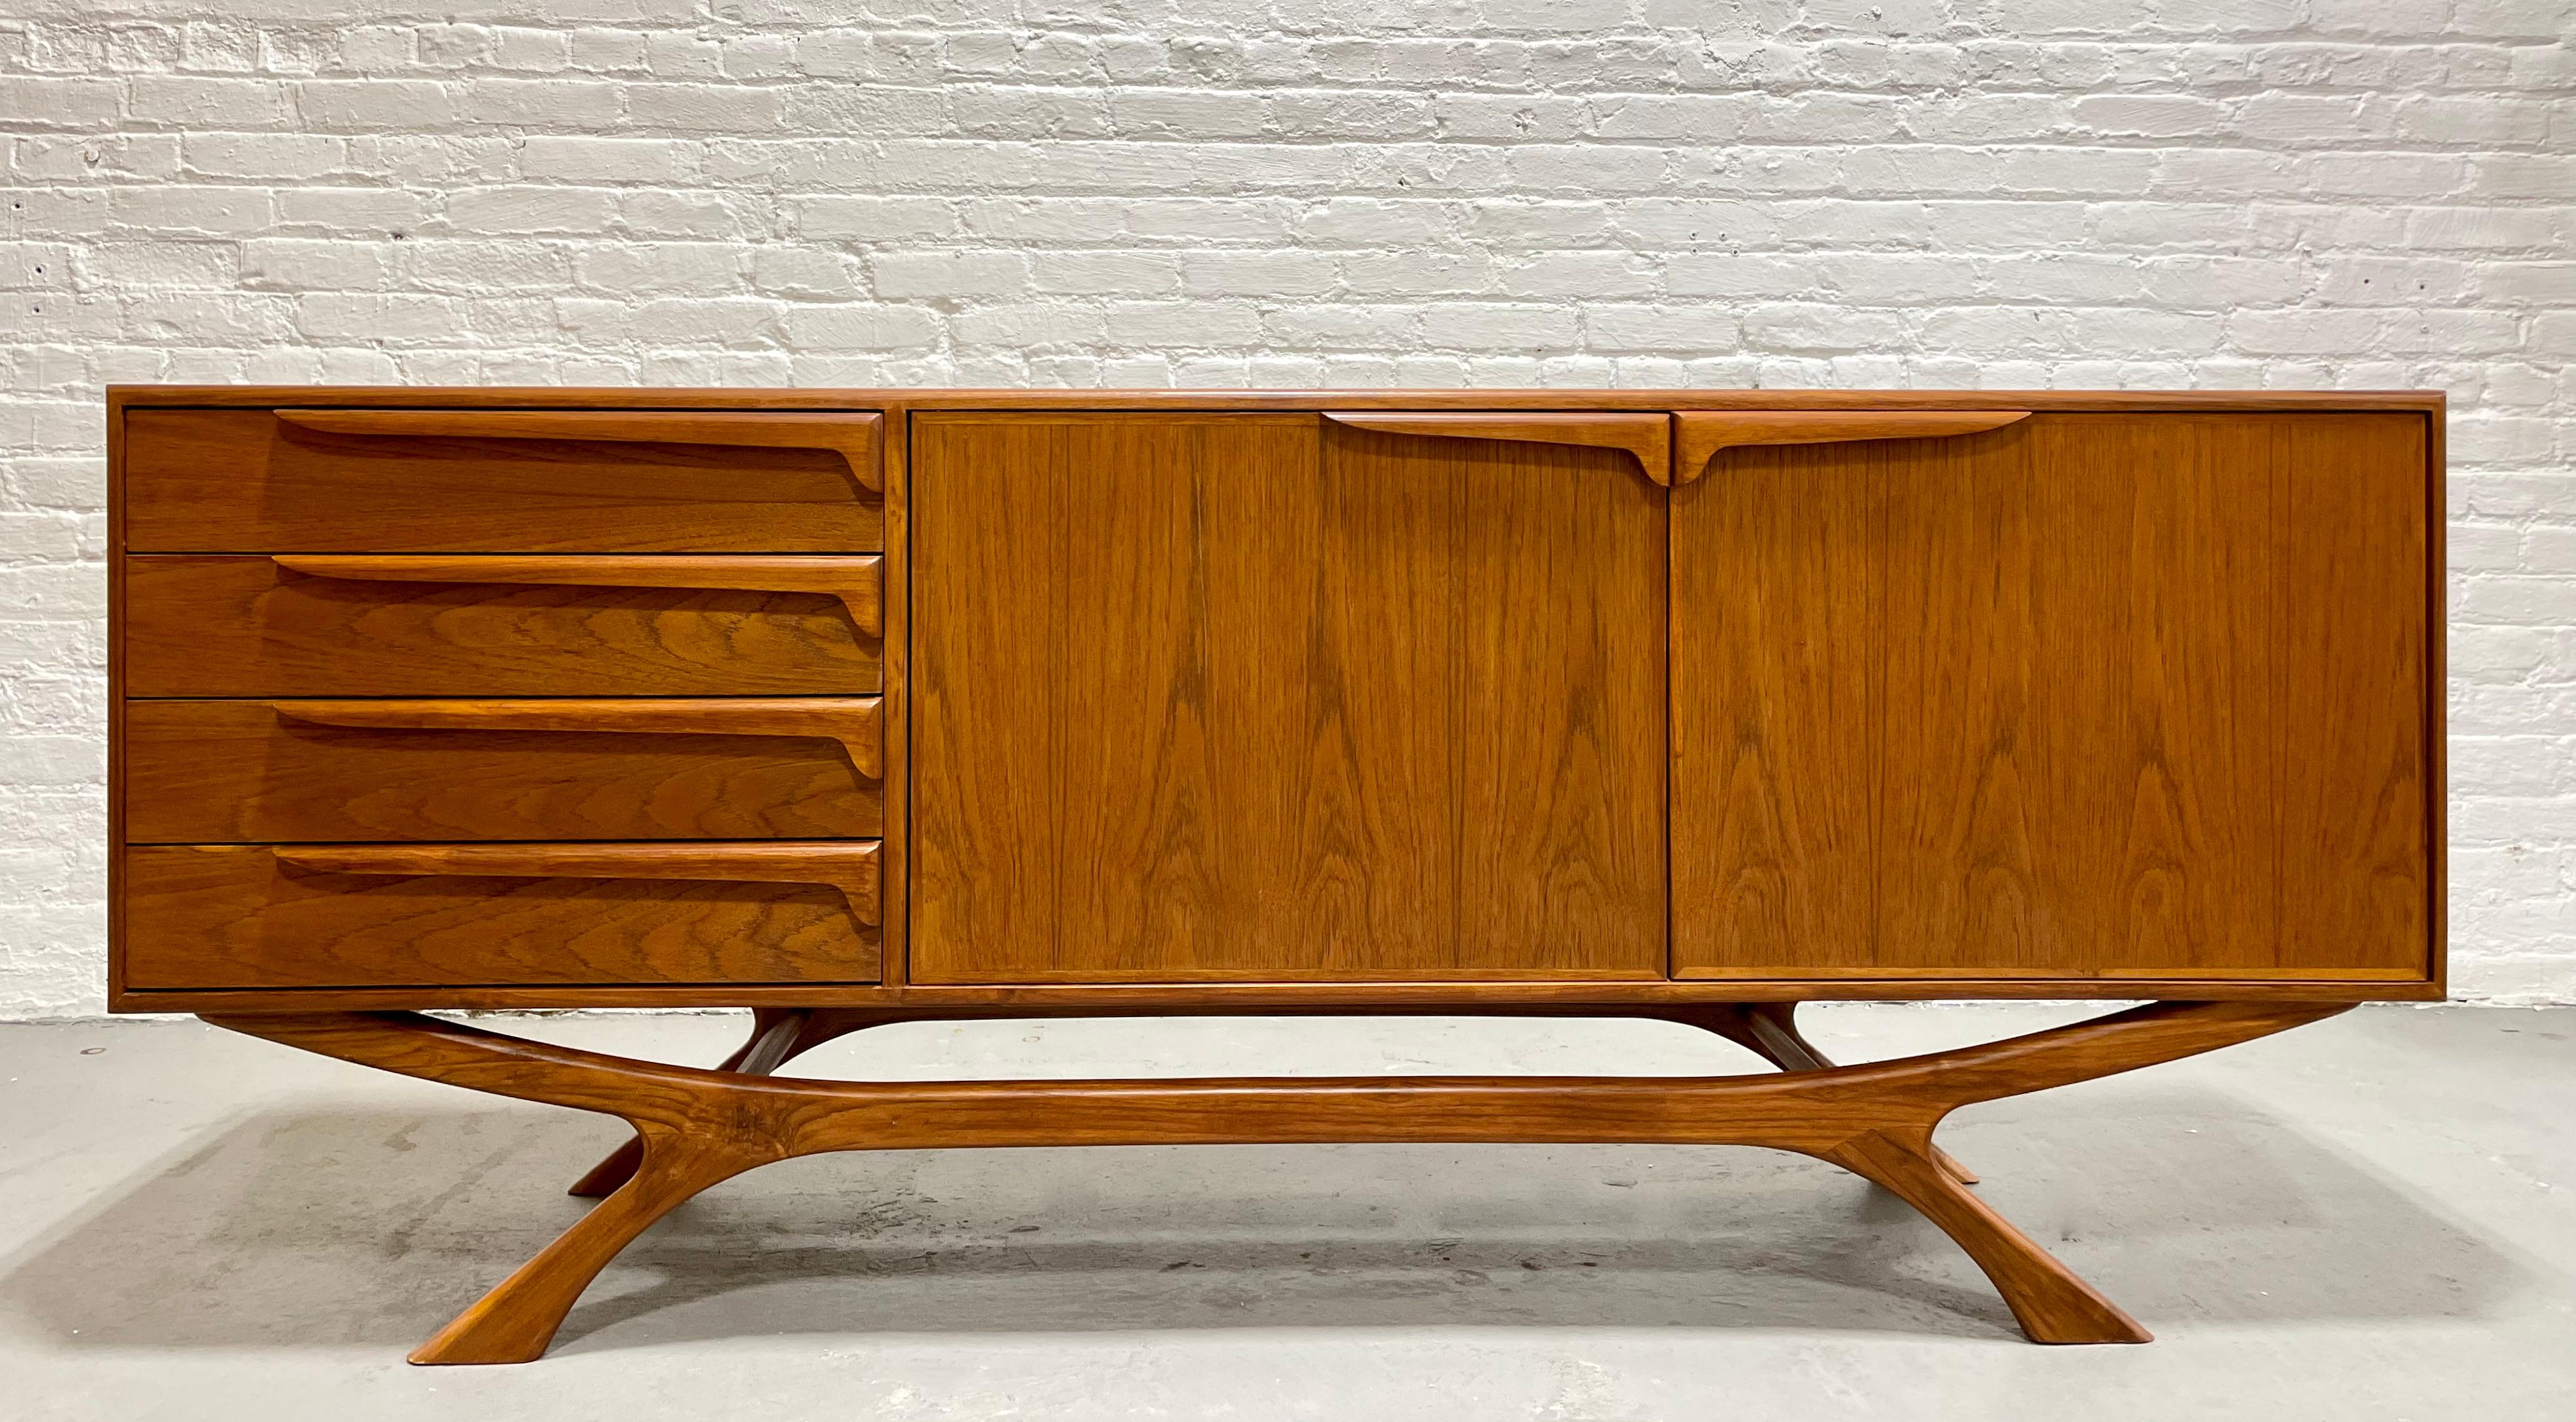 Monumental Mid Century Modern styled Credenza / Media Stand with jaw-dropping base.  Perfect layout for a media stand - generous shelving (adjustable to three heights and removable) for components and four spacious drawers for remotes and other